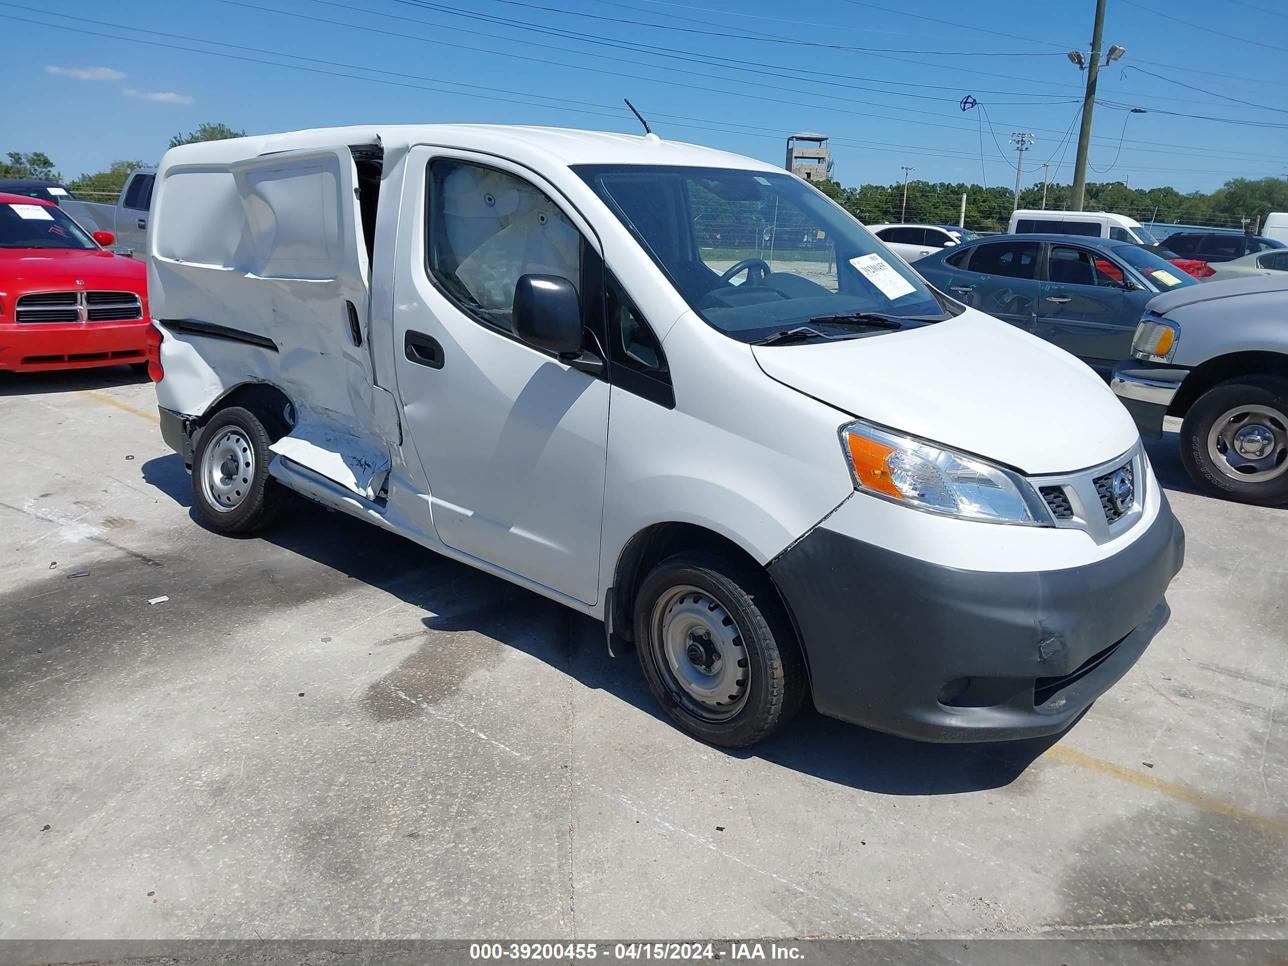 vin: 3N6CM0KN3HK708013 3N6CM0KN3HK708013 2017 nissan nv200 2000 for Sale in 33760, 5152 126Th Ave N, Clearwater, Florida, USA